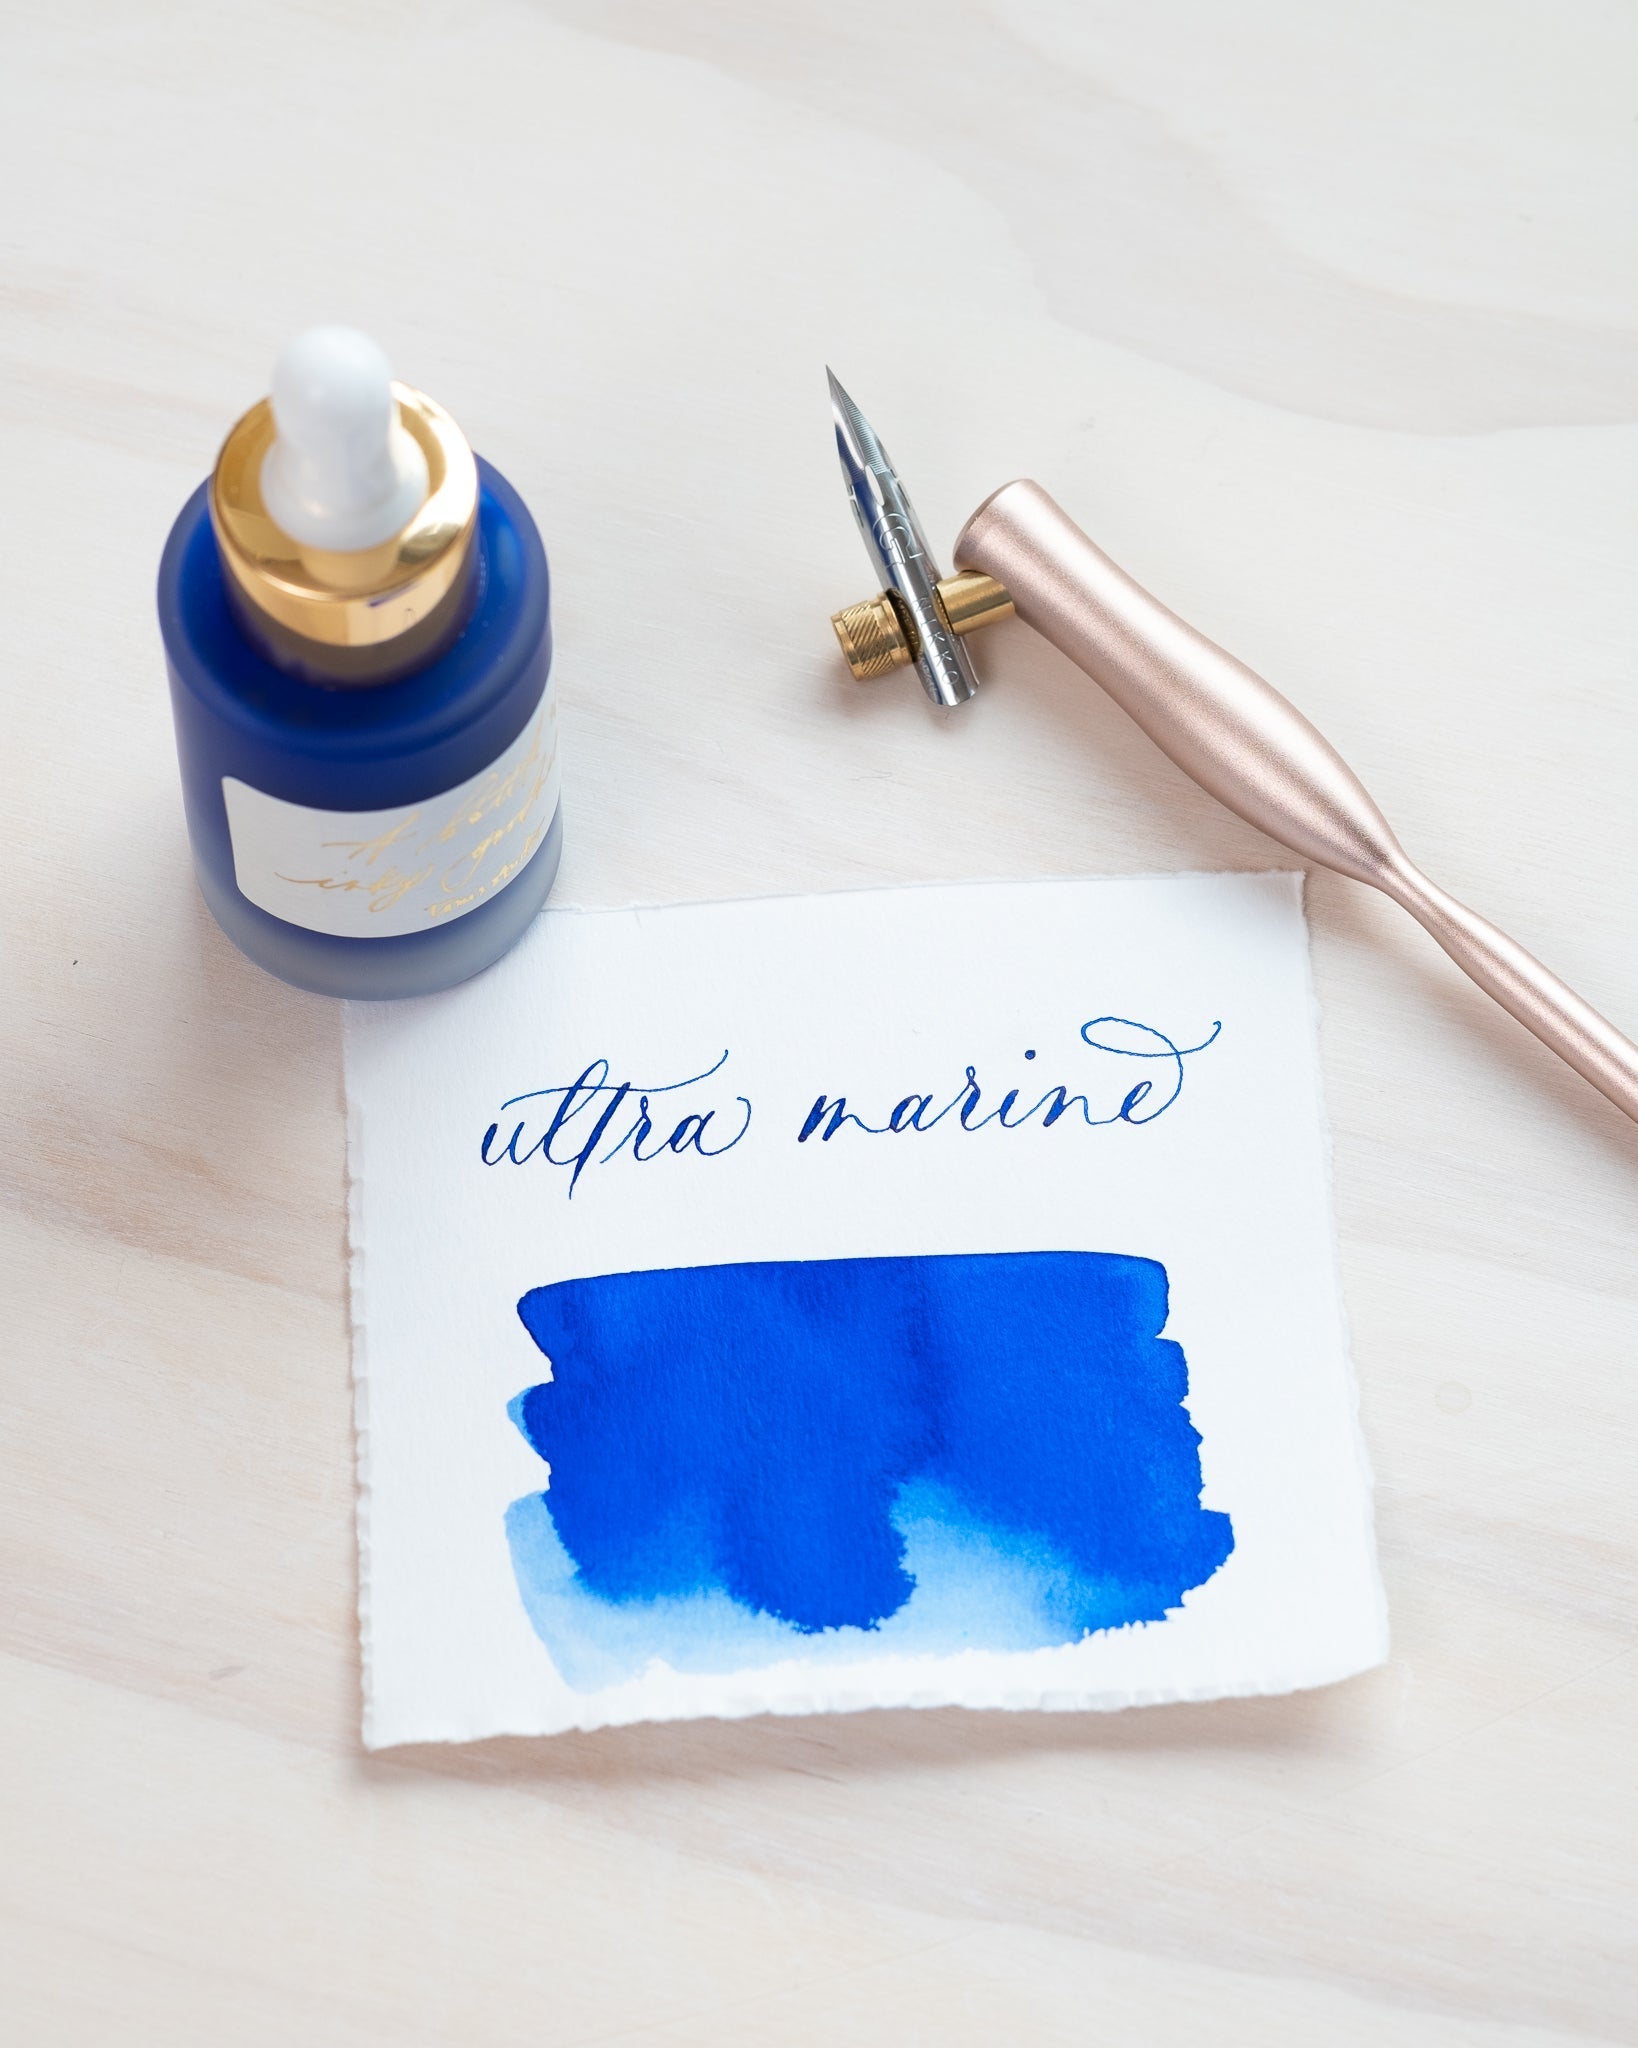 Ultra Marine - Calligraphy Ink in bottle with swatch showing the ink colour